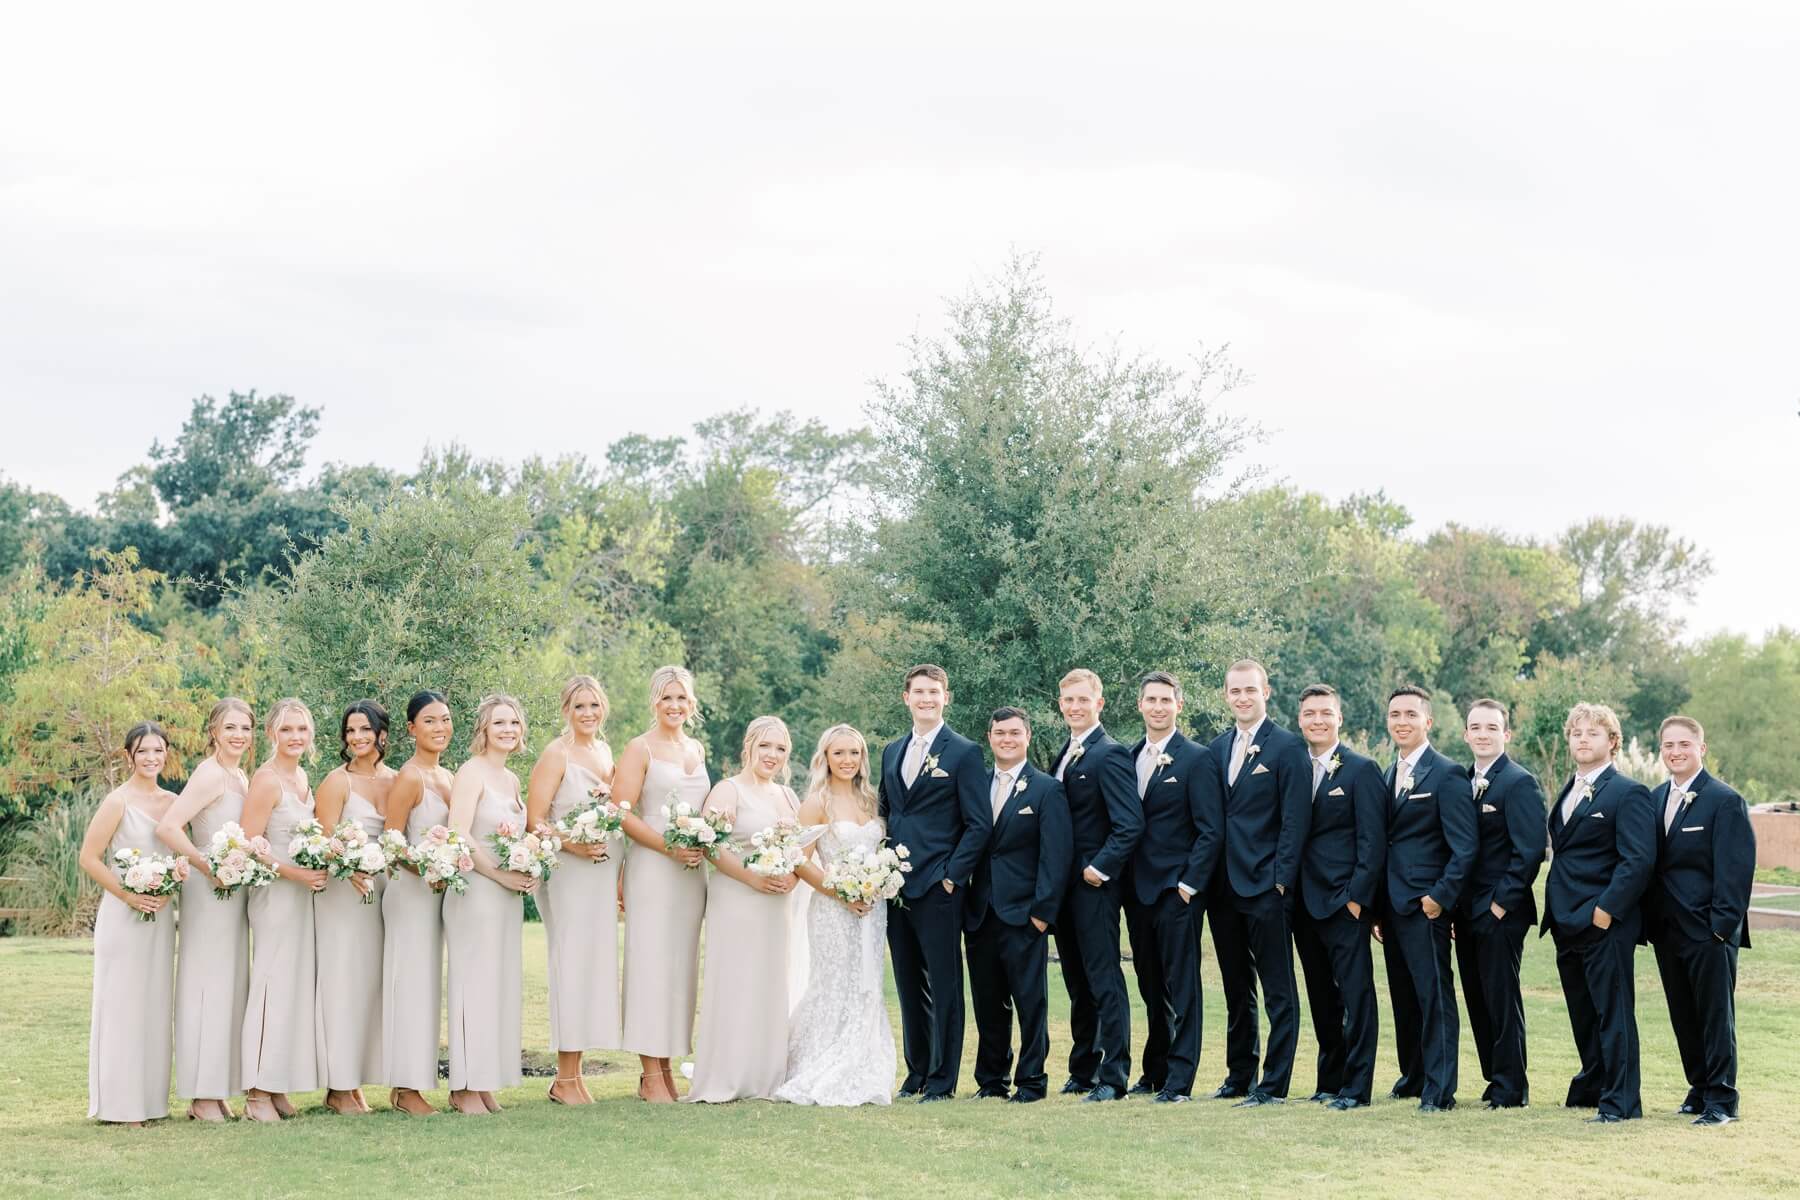 Bride and groom with wedding party at The Springs in McKinney